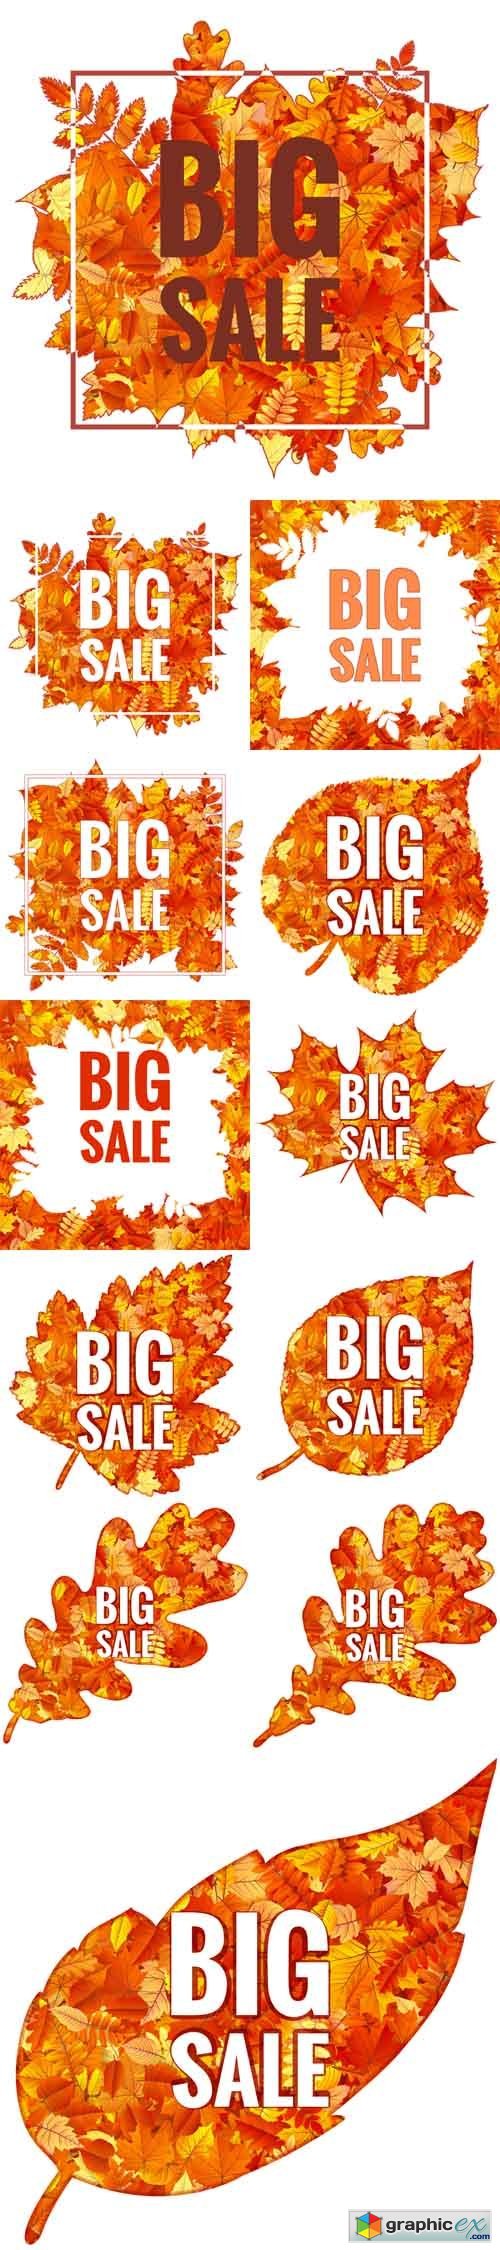 Autumn Sales Banner With Colorful Leaves